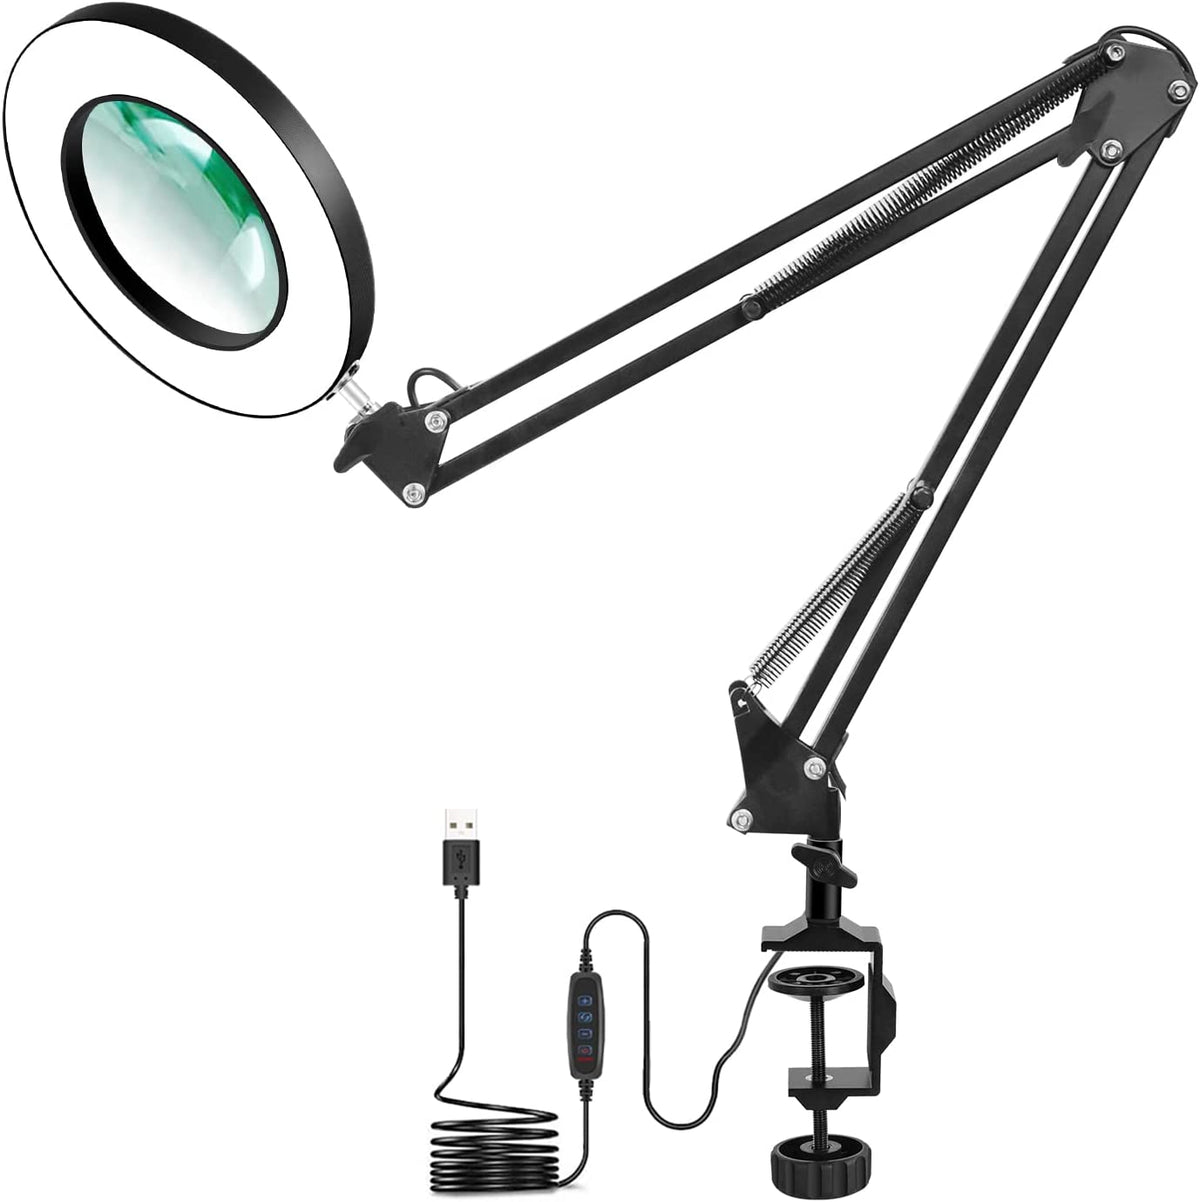 LED Magnifying Lamp with Clamp Real Glass Lens, Adjustable Swivel Arm Lighted Magnifier Table Light